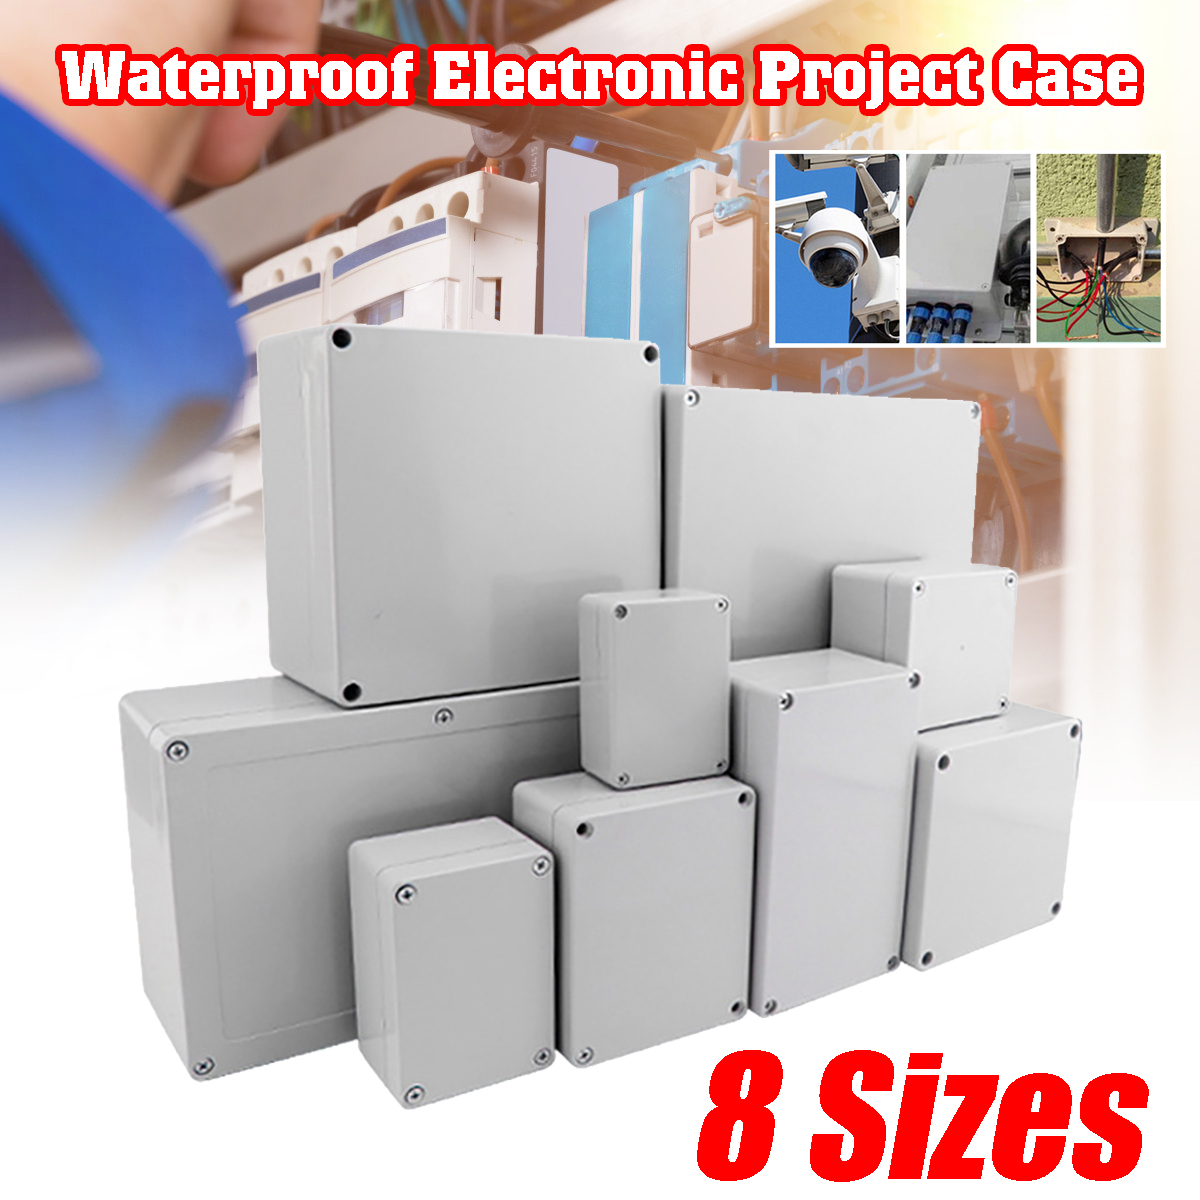 Waterproof-Plastic-Enclosure-Box-Electronic-Project-Case-Electrical-Project-Box-Outdoor-Junction-Box-1678840-1